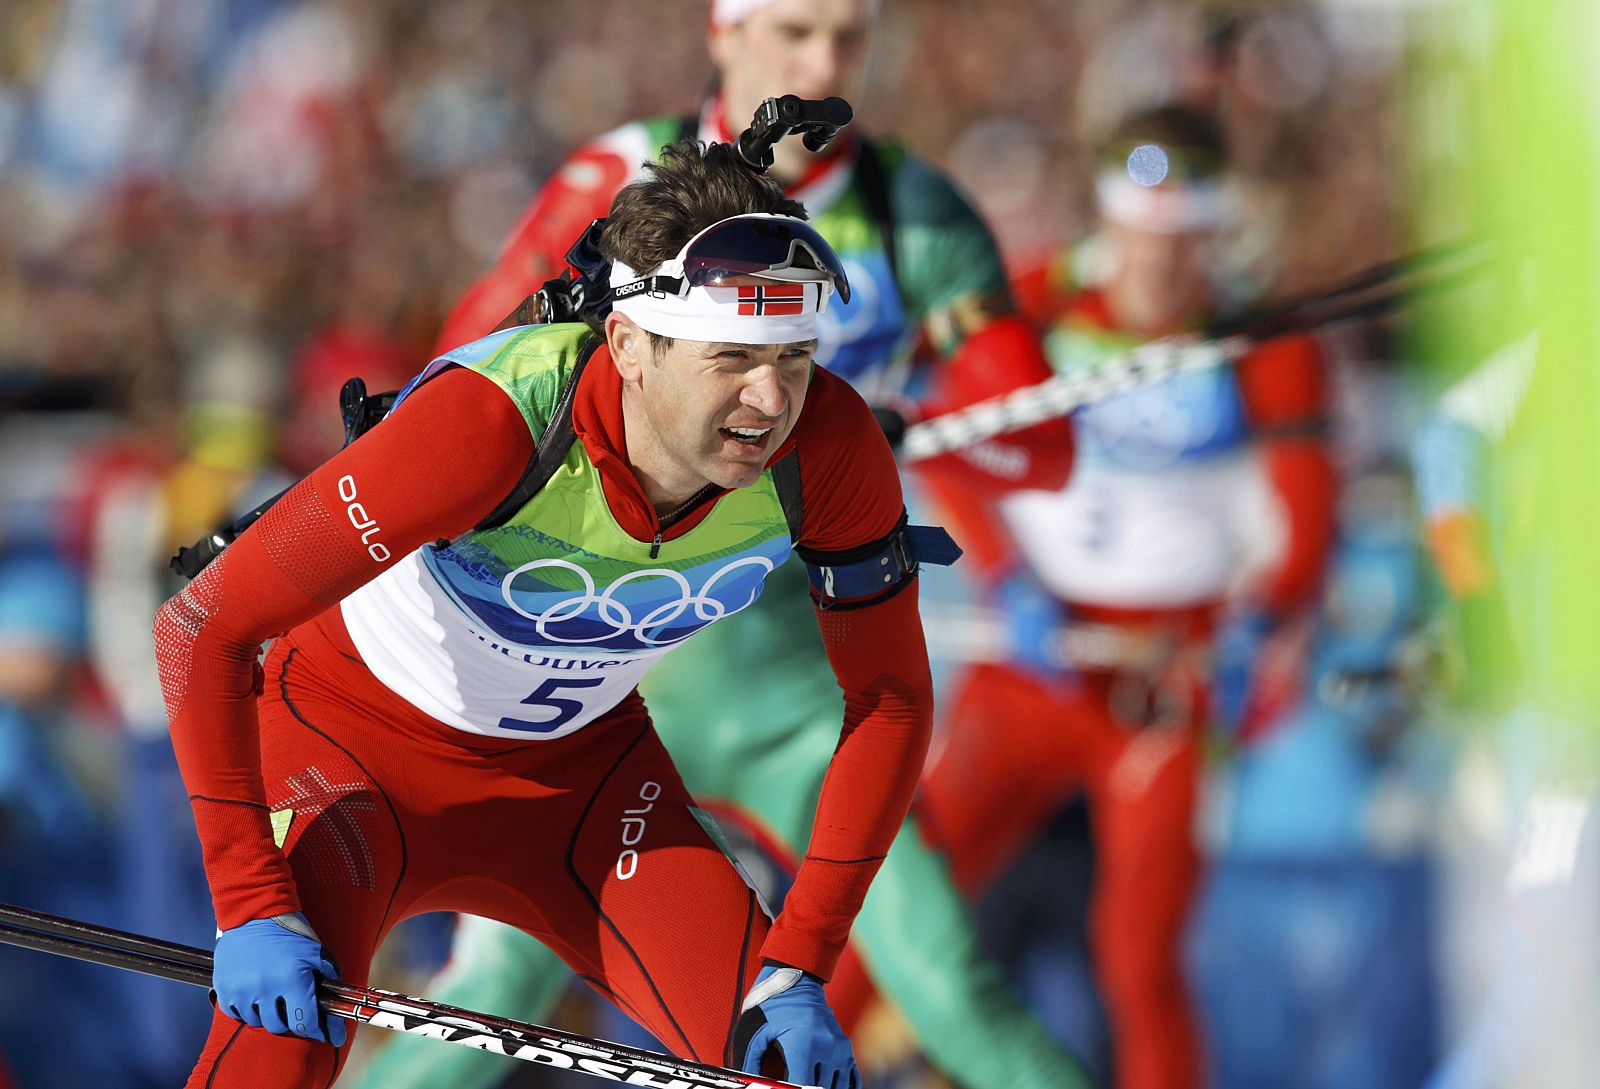 Norway's Bjoerndalen approaches shooting range during men's 15 km mass start biathlon final at the Vancouver 2010 Winter Olympics in Whistler